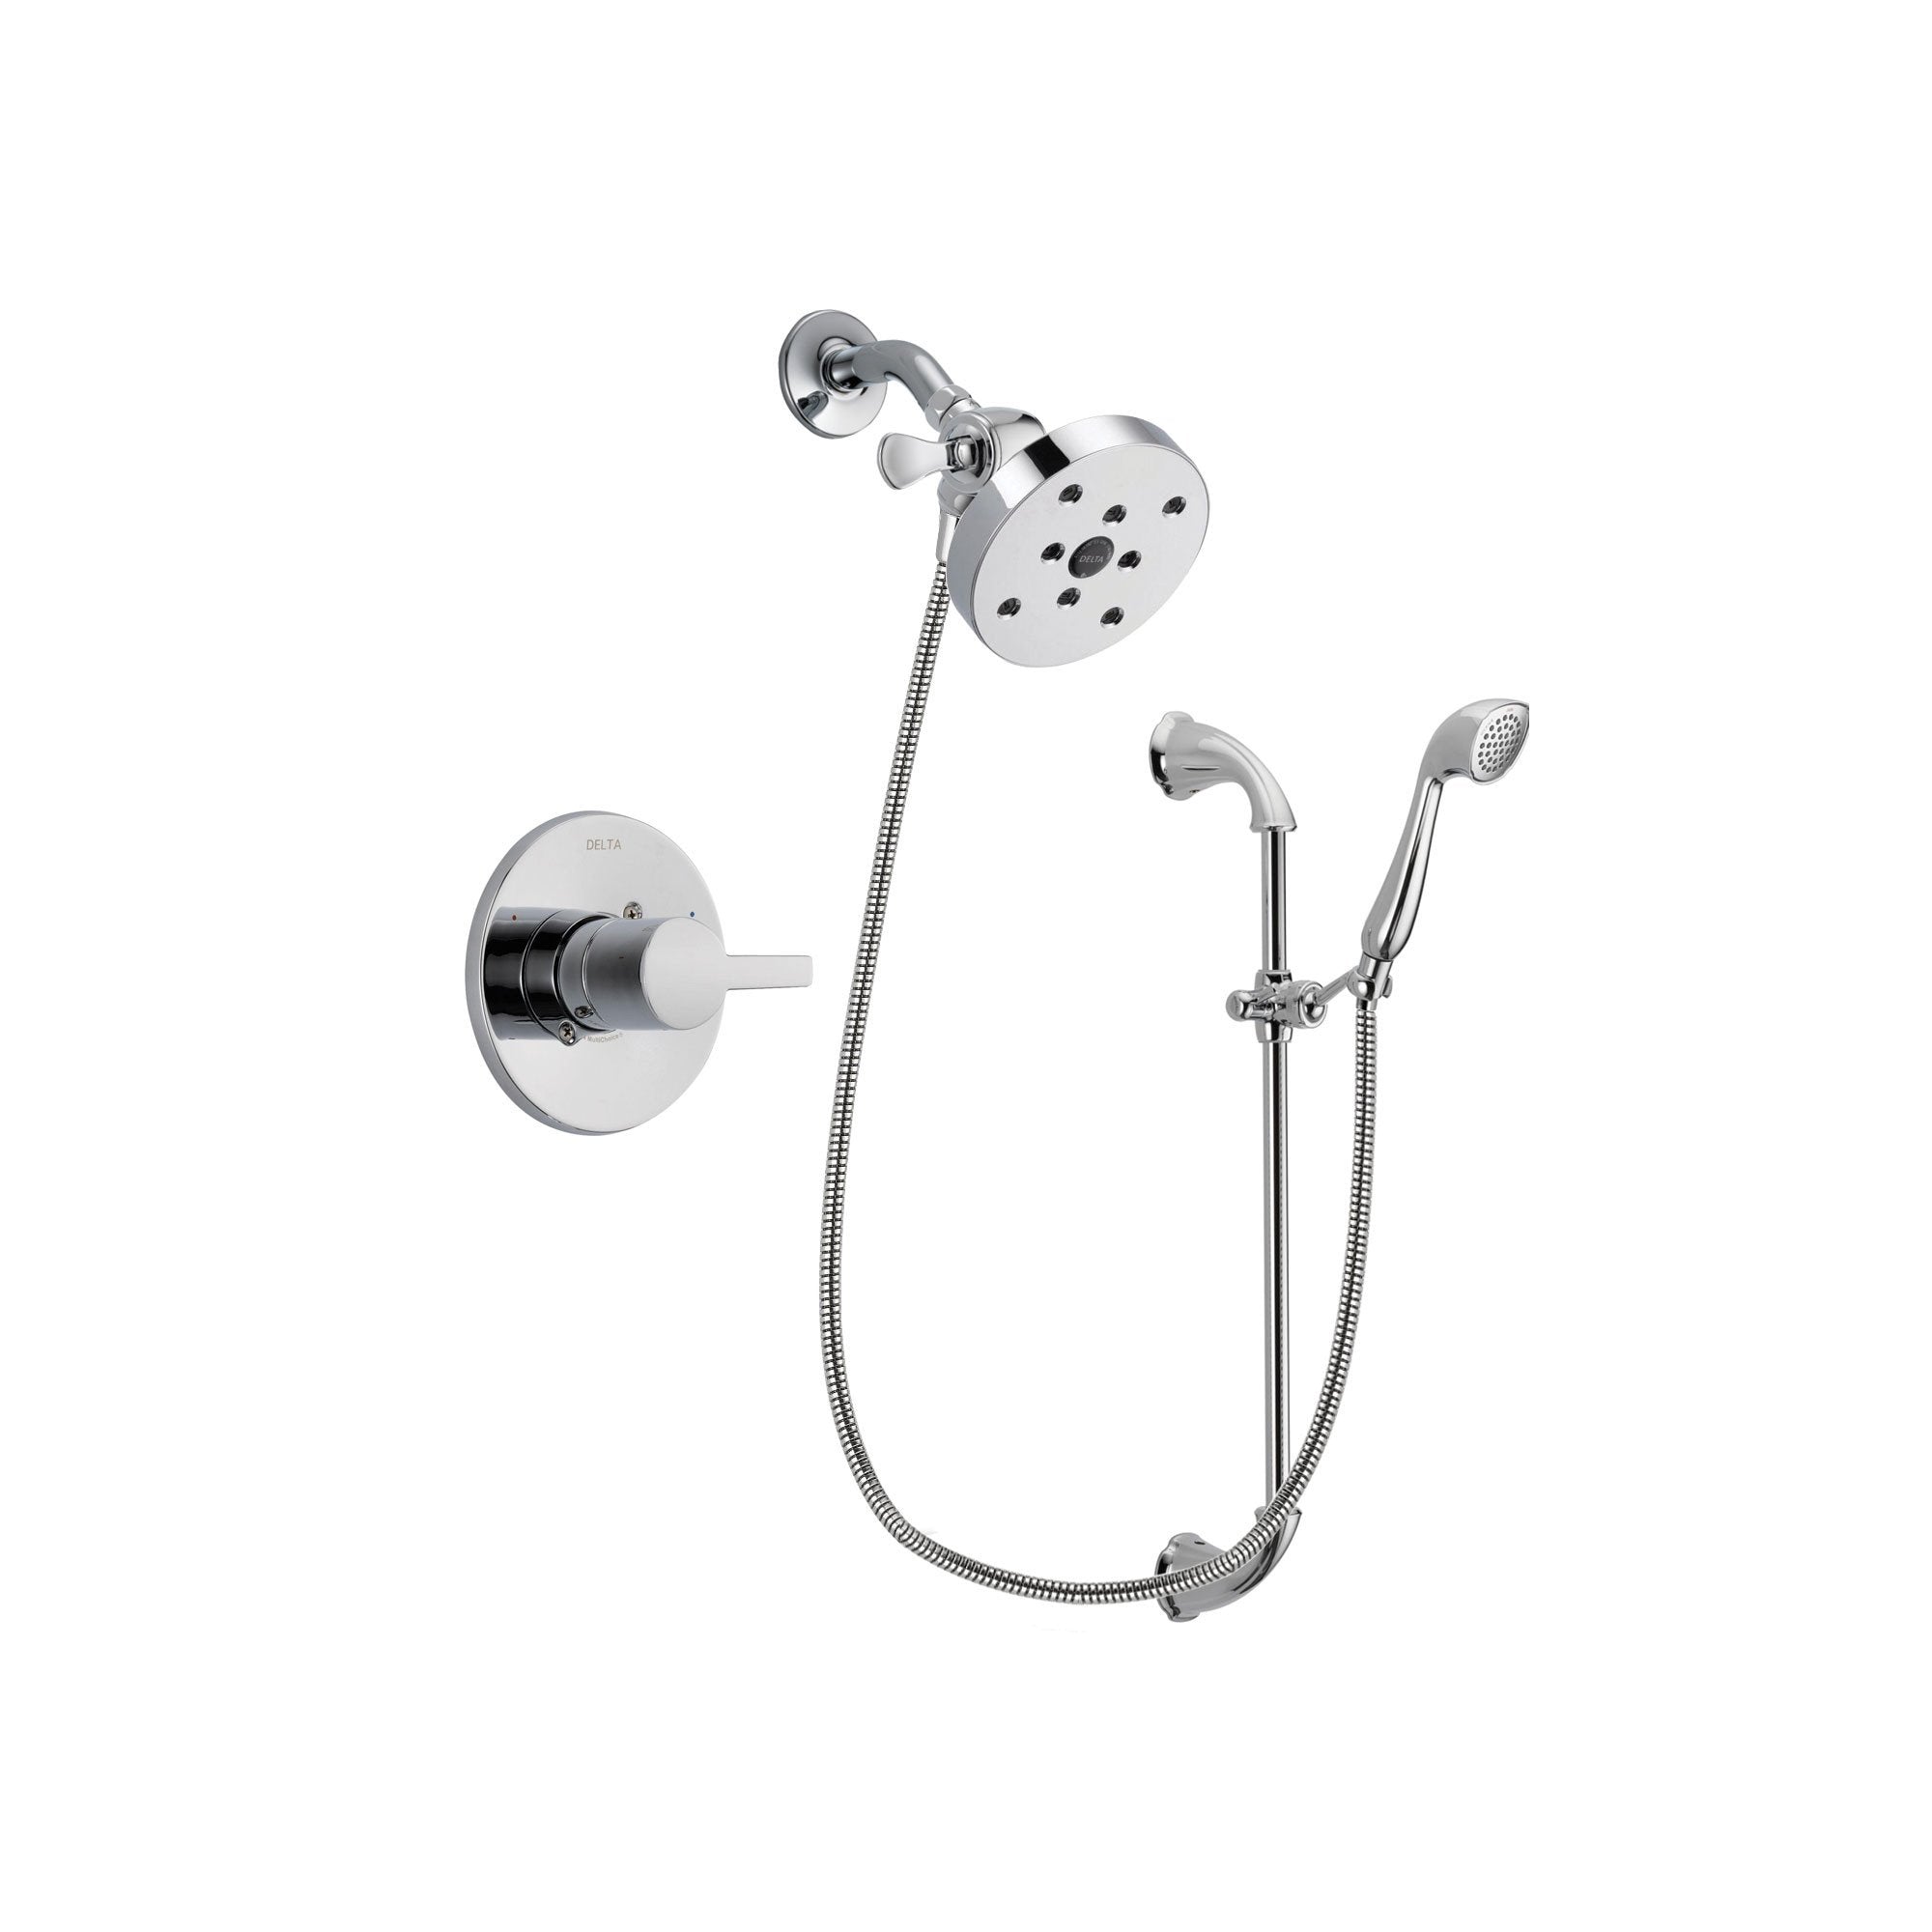 Delta Compel Chrome Shower Faucet System w/ Shower Head and Hand Shower DSP0950V